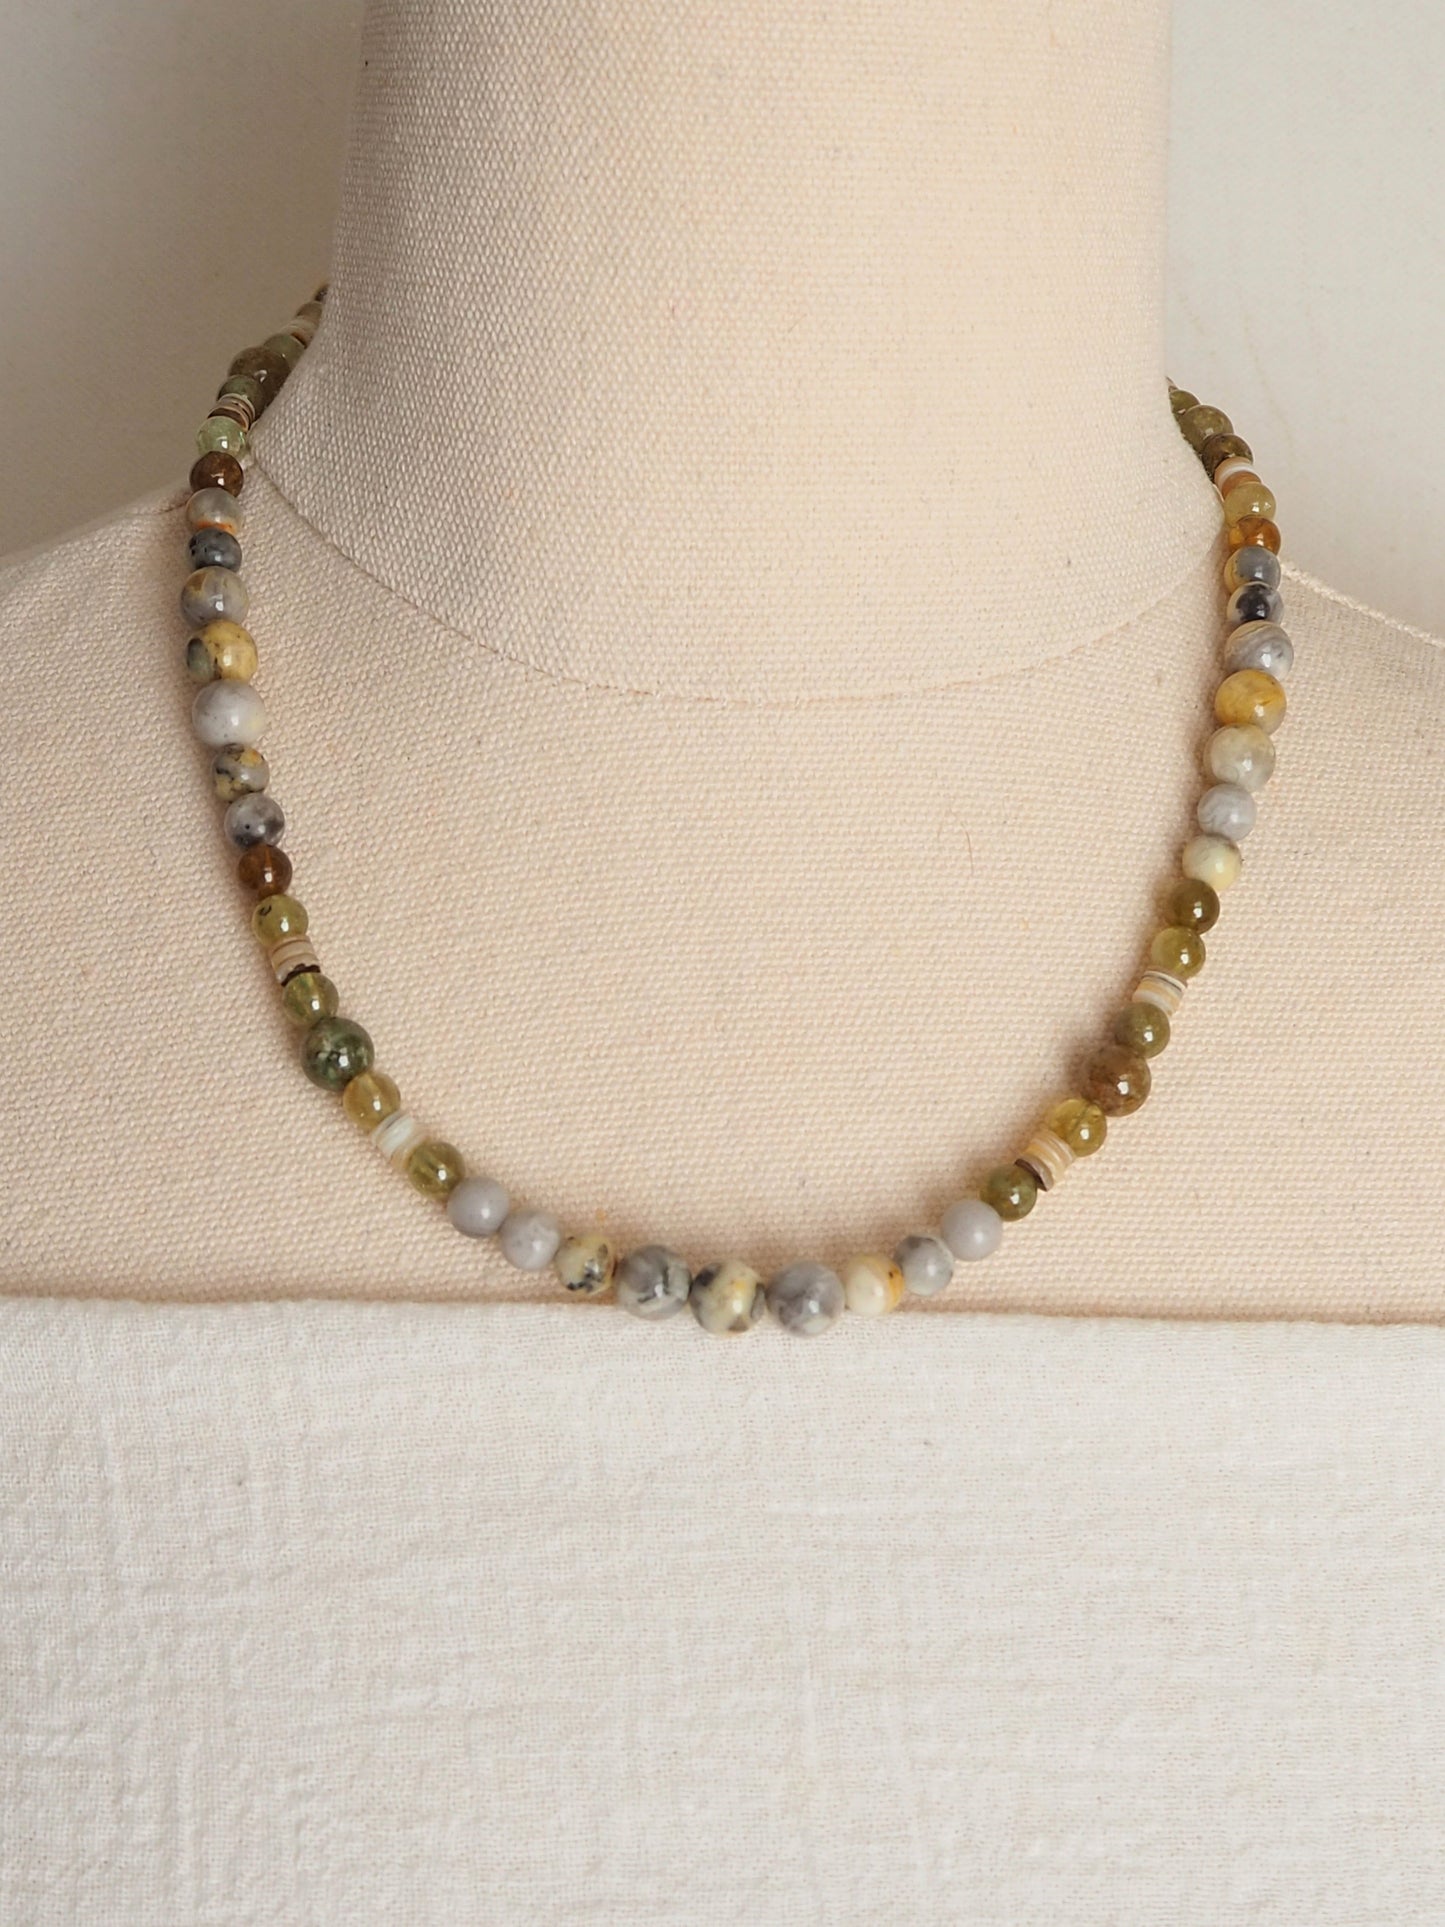 Lace Agate and Green Garnet Hand Beaded Necklace